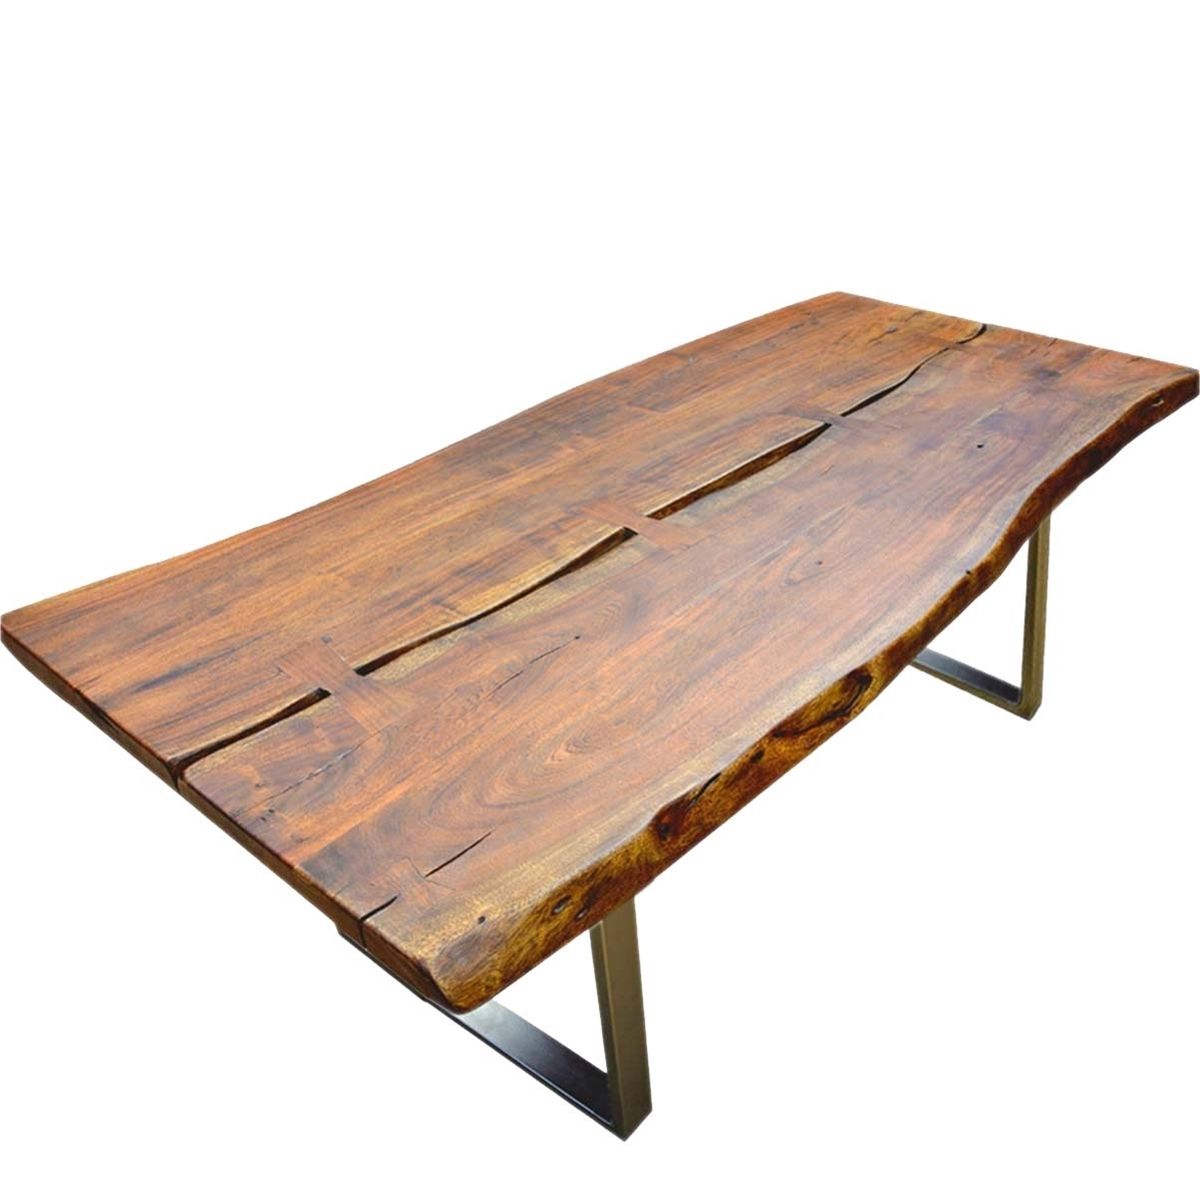 Iron And Wood Dining Tables For Most Recent Live Edge Acacia Wood & Iron Rustic Large Dining Table (View 22 of 25)